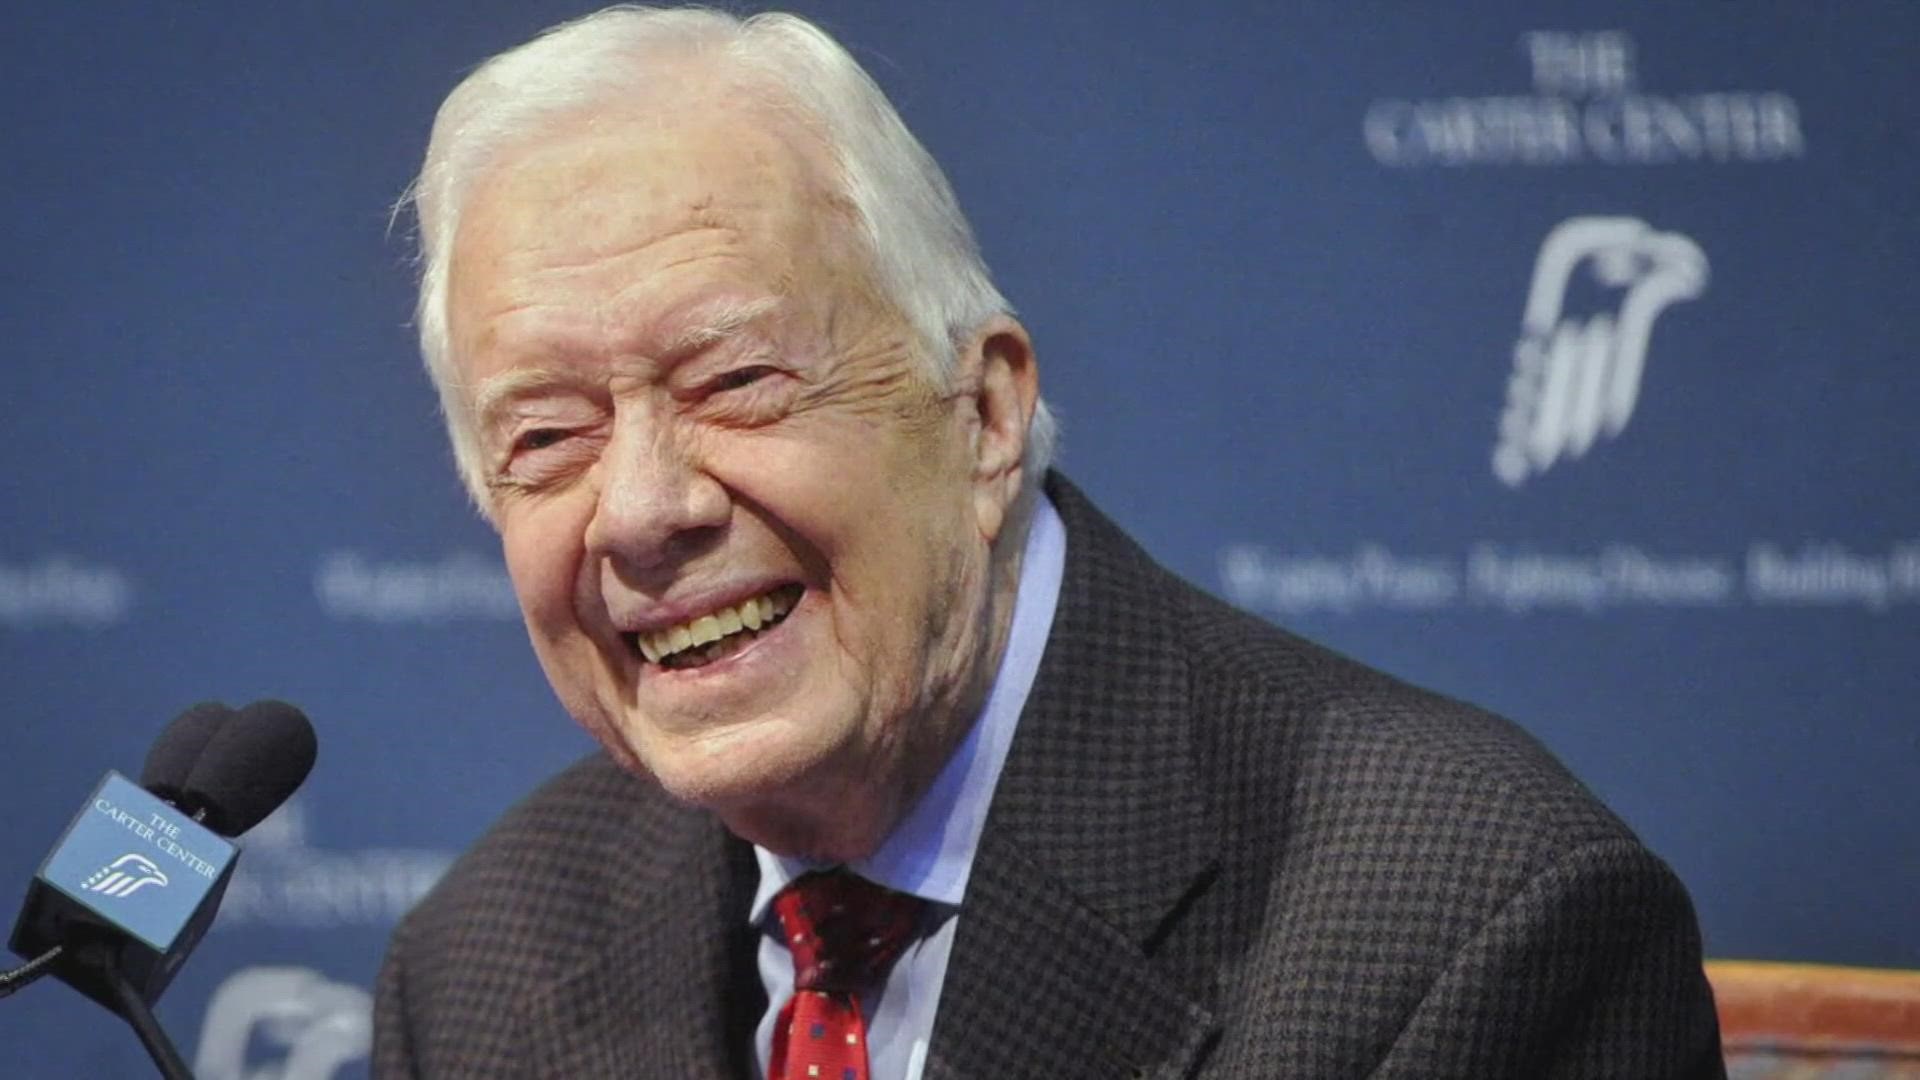 At 98, former U.S. President Jimmy Carter has entered hospice care and will be with family.